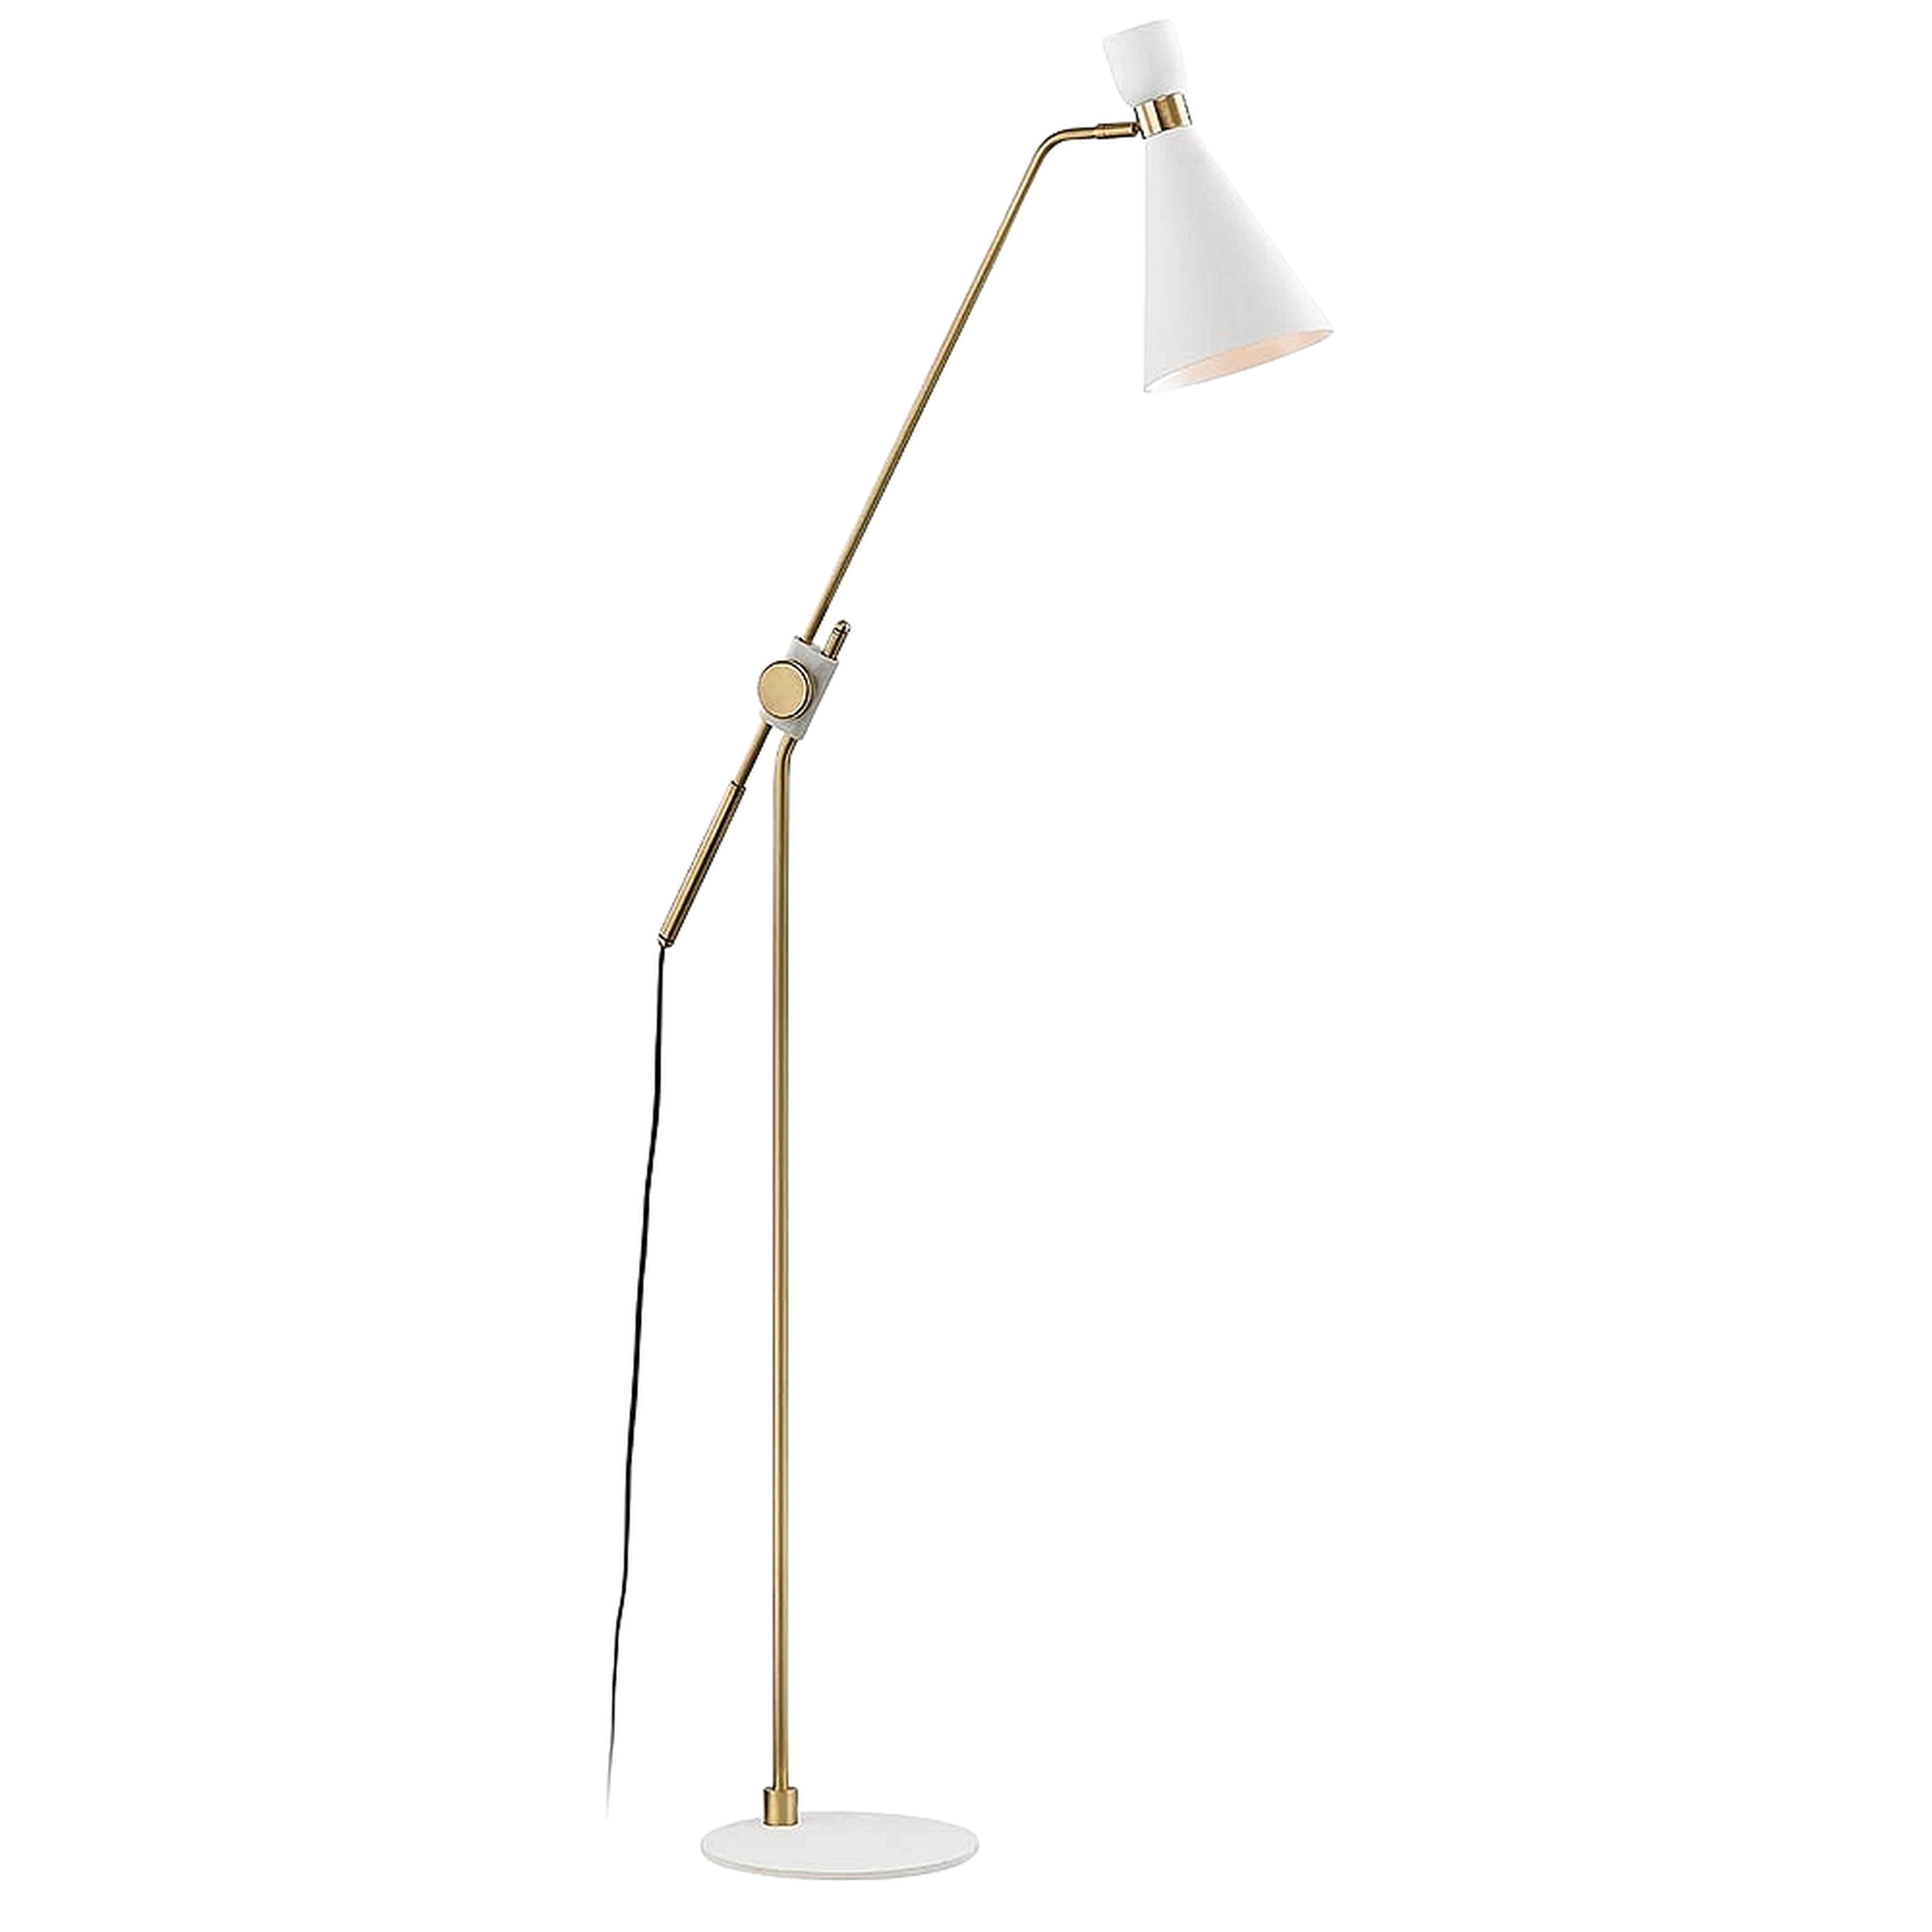 Mitzi Willa Aged Brass and White Adjustable Arm Floor Lamp - Style # 69V77 - Lamps Plus